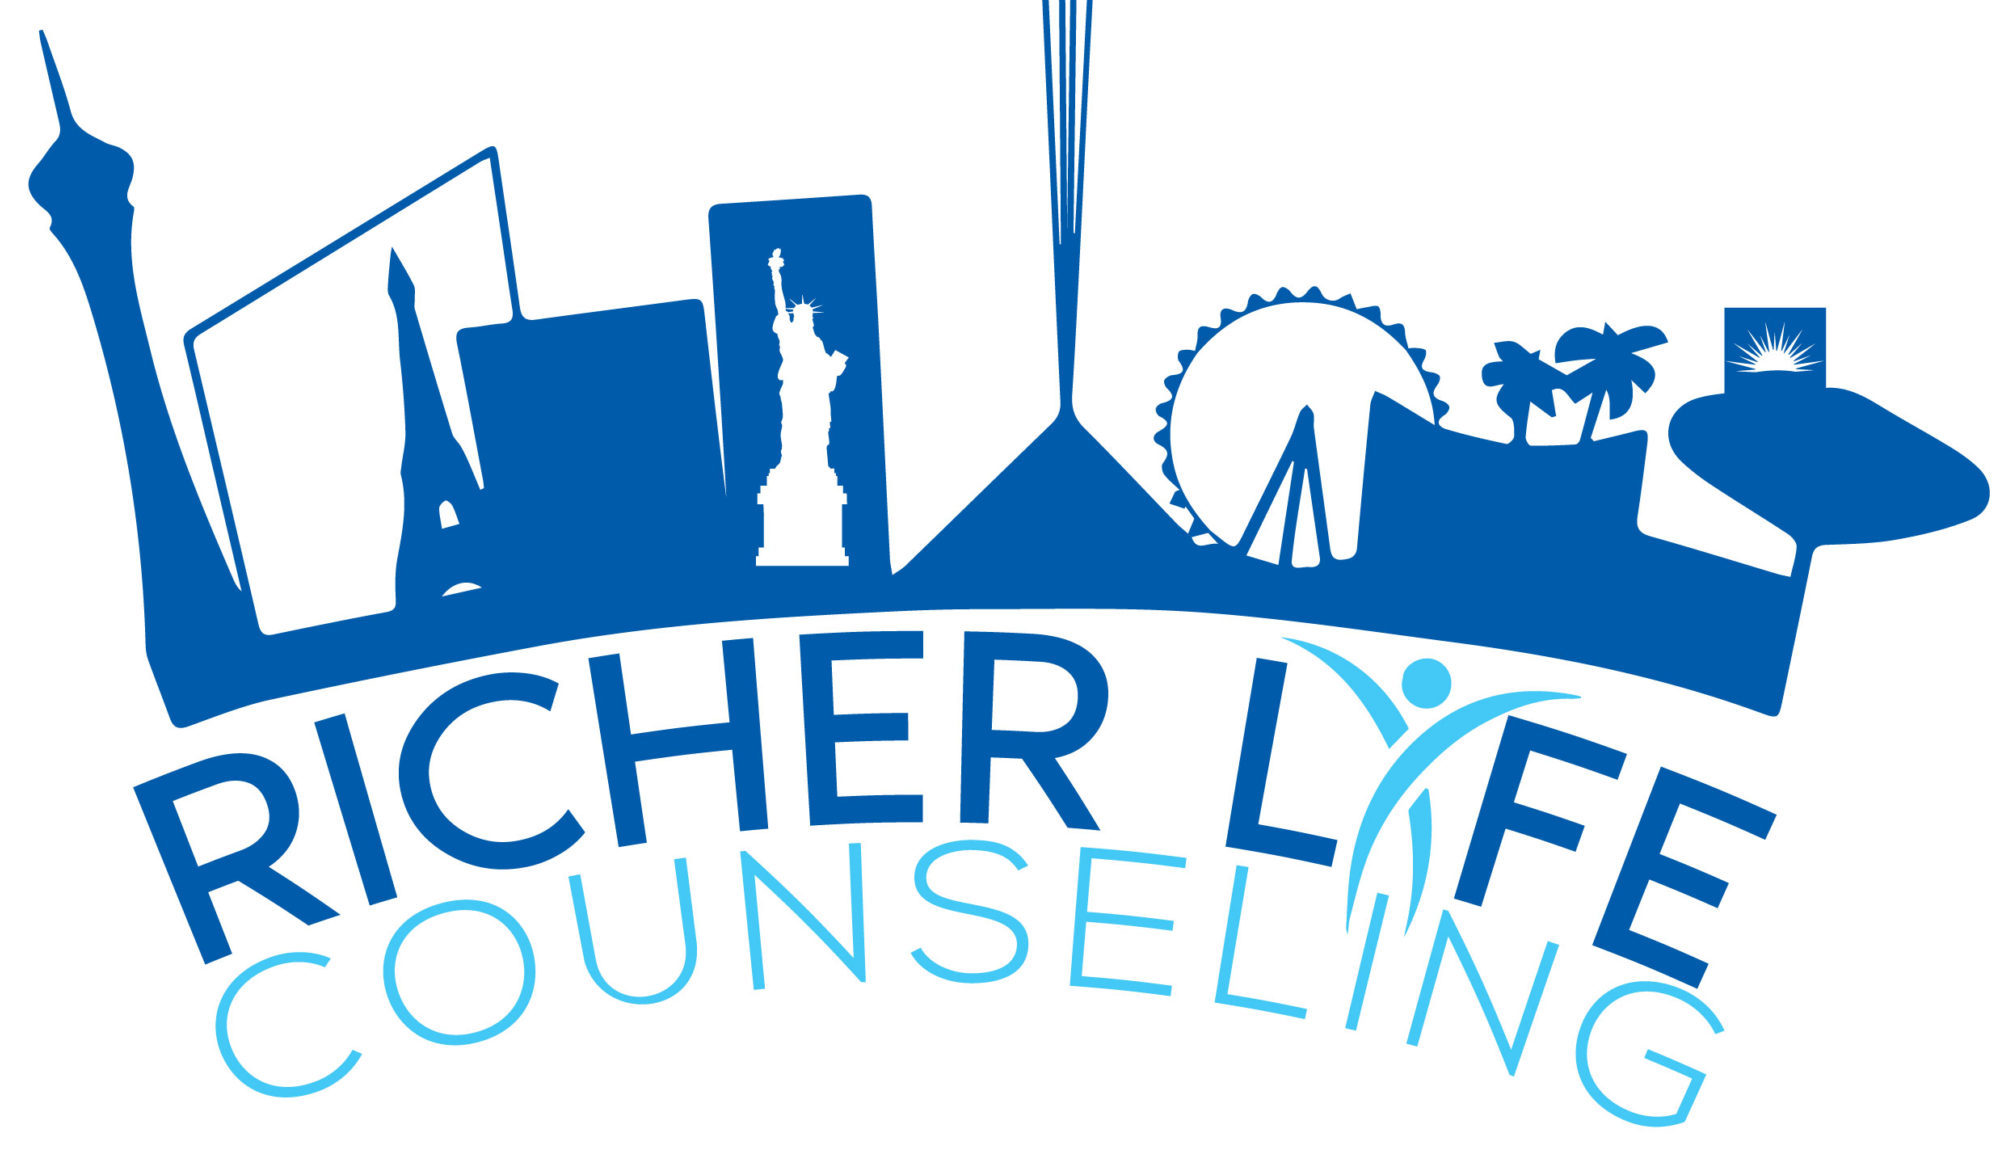 Gamer Therapy - Richer Life Counseling